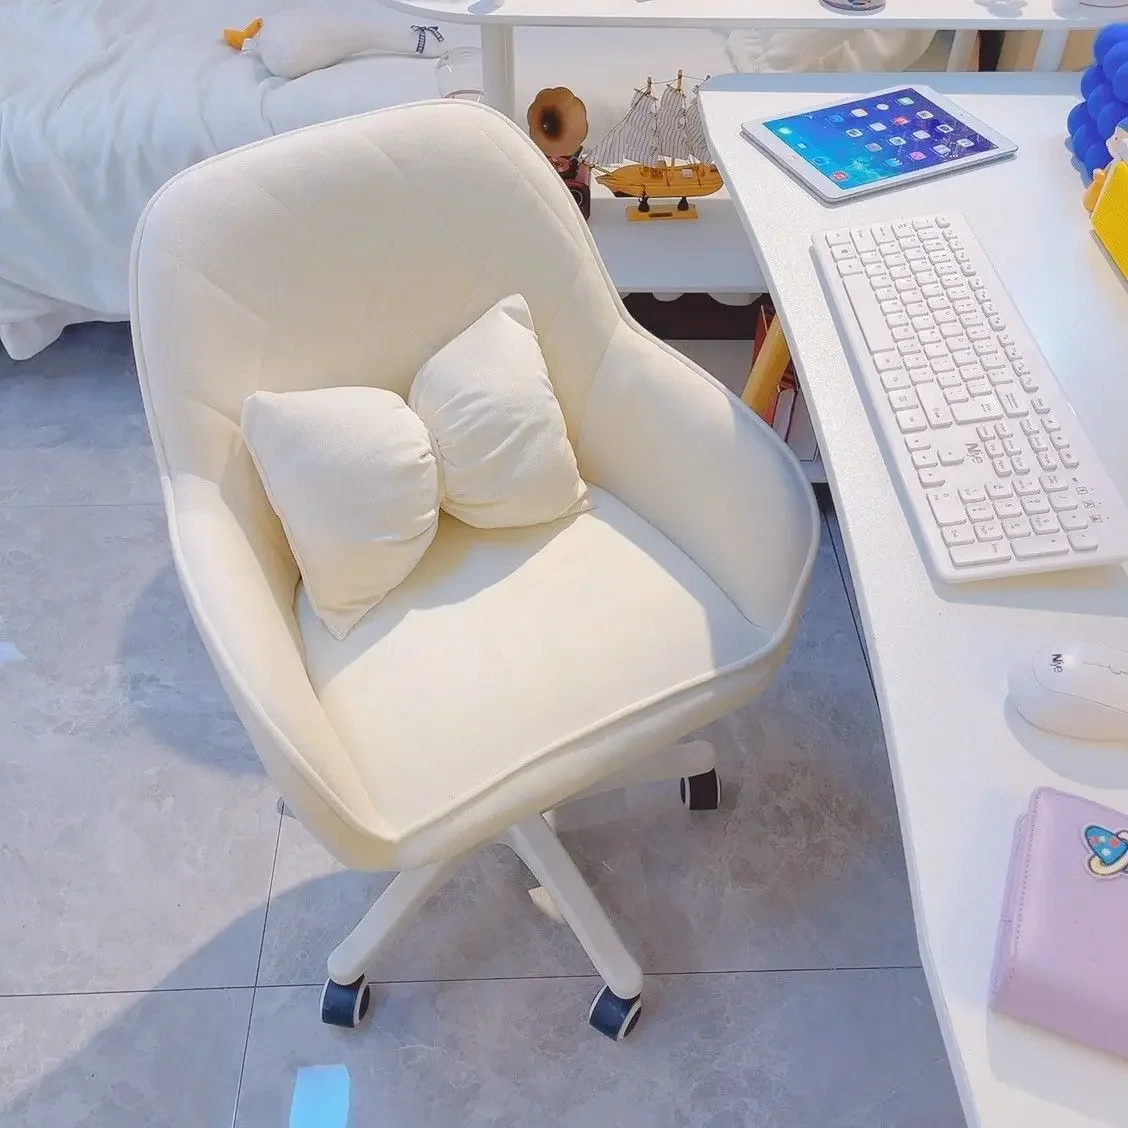 

Chair Bedroom Girl Lovely Home Computer Chair Lift Desk Chair Dormitory Study Sedentary Makeup Stool Office Chairs Gamer Chairs